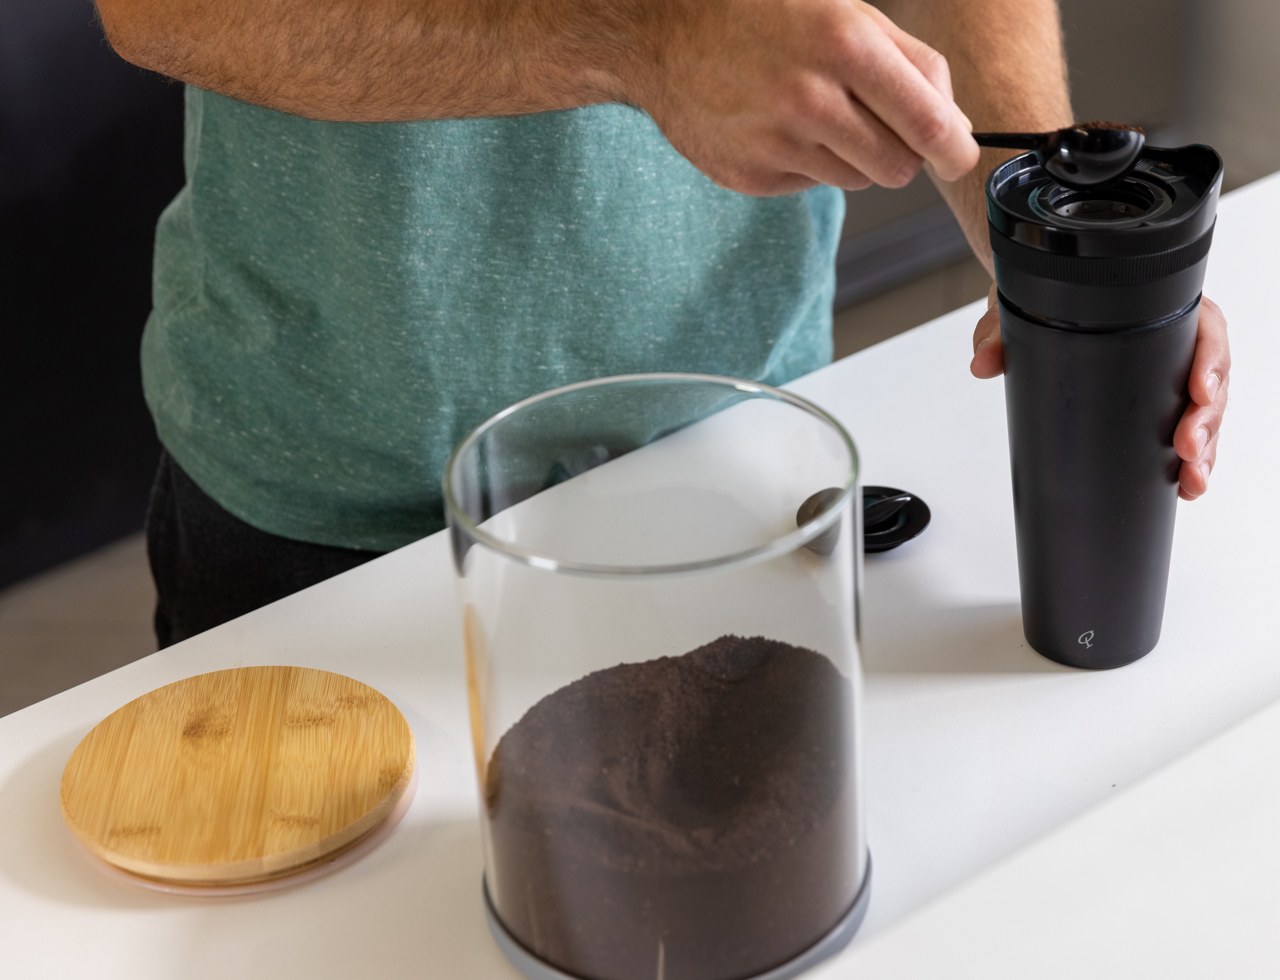 Keep your coffee warm throughout the day in a thermos.